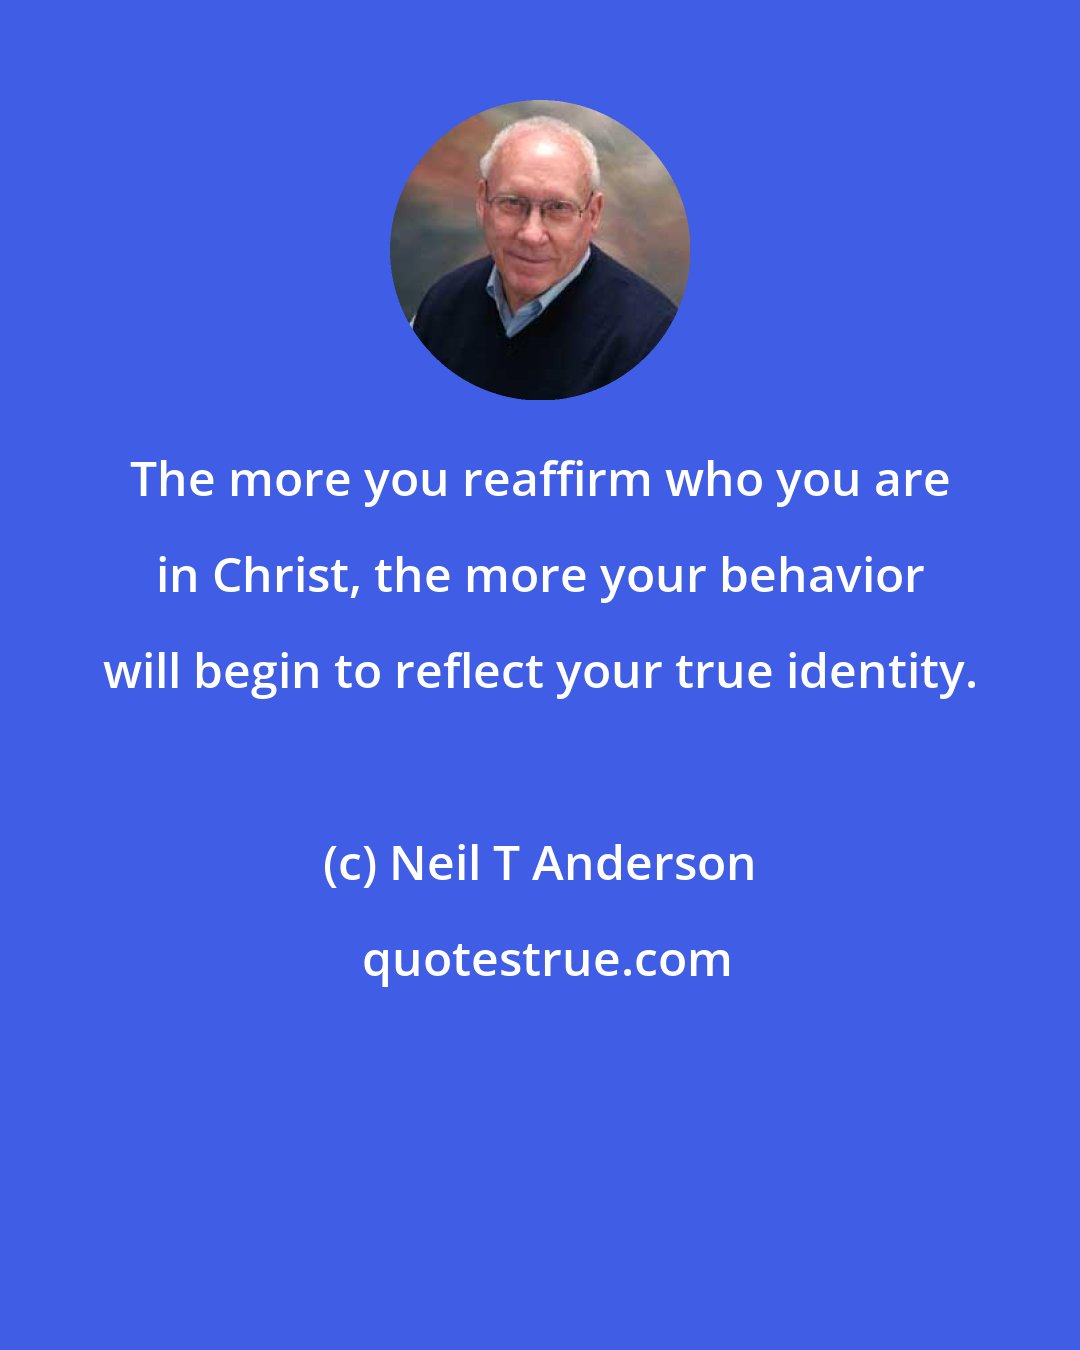 Neil T Anderson: The more you reaffirm who you are in Christ, the more your behavior will begin to reflect your true identity.